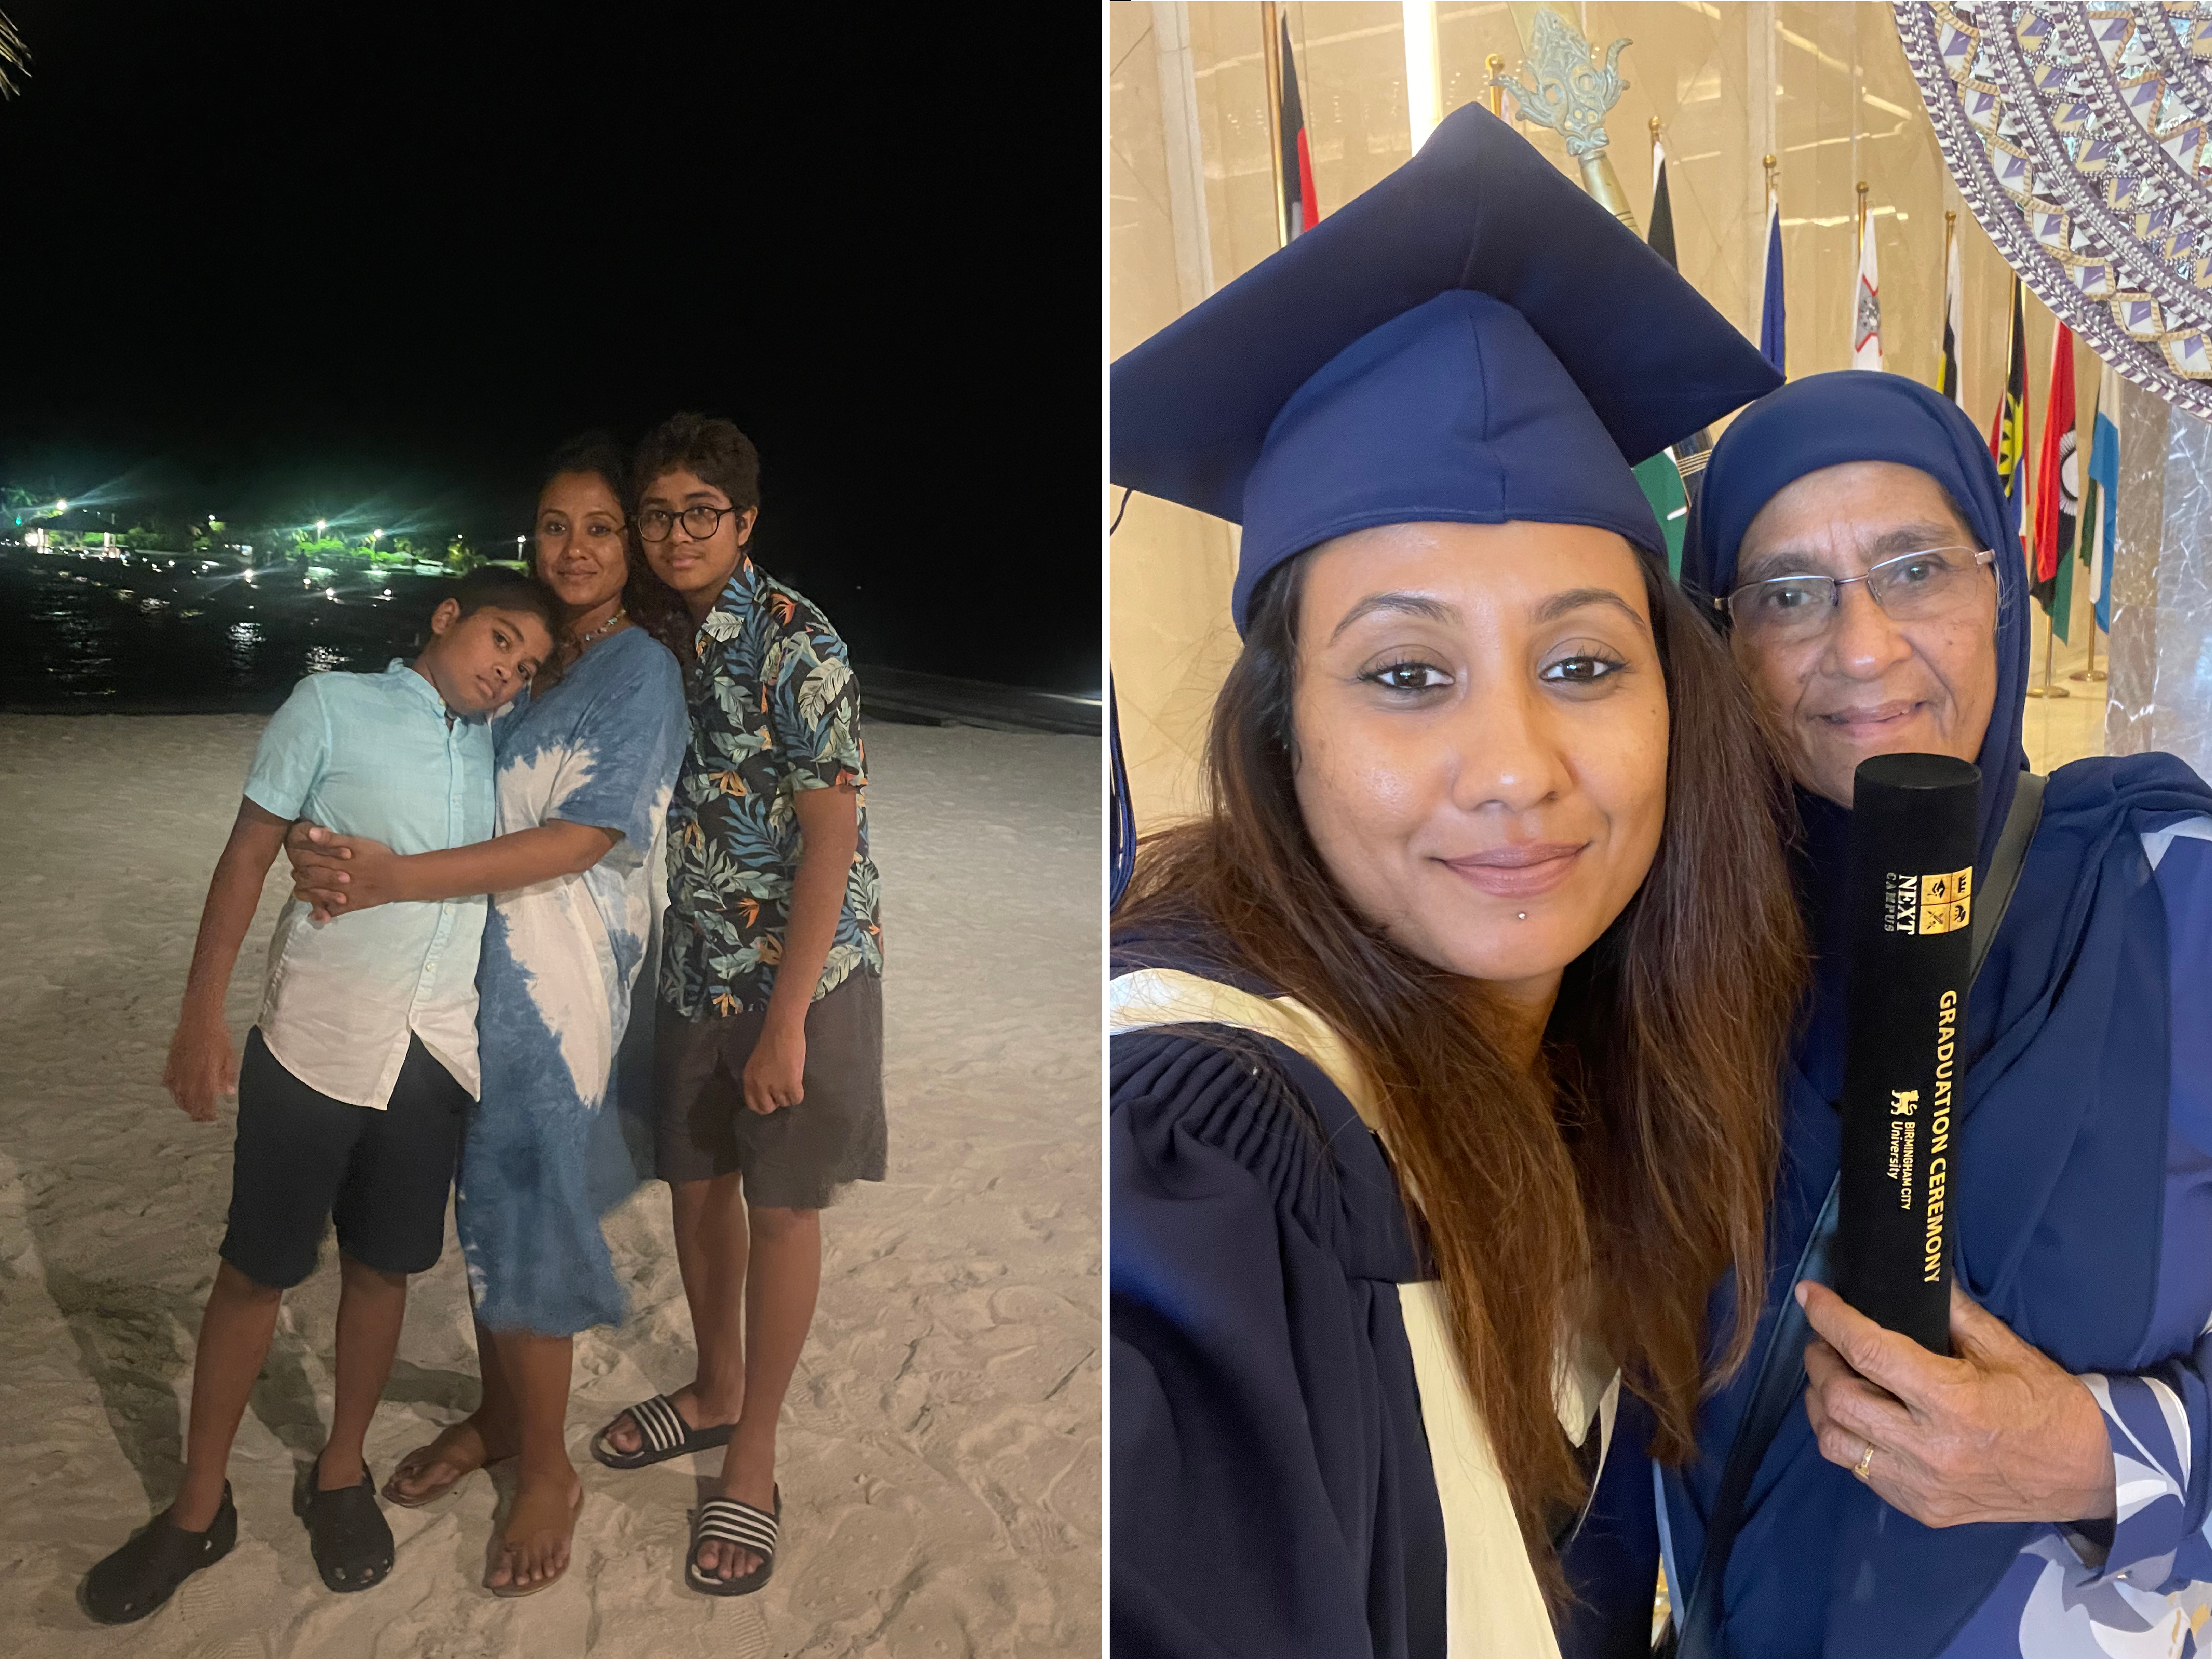 Muna’s family, the heart of her support system. Left: Precious moments with her sons. Right: A proud milestone with her mother at her Master’s graduation. © Muna